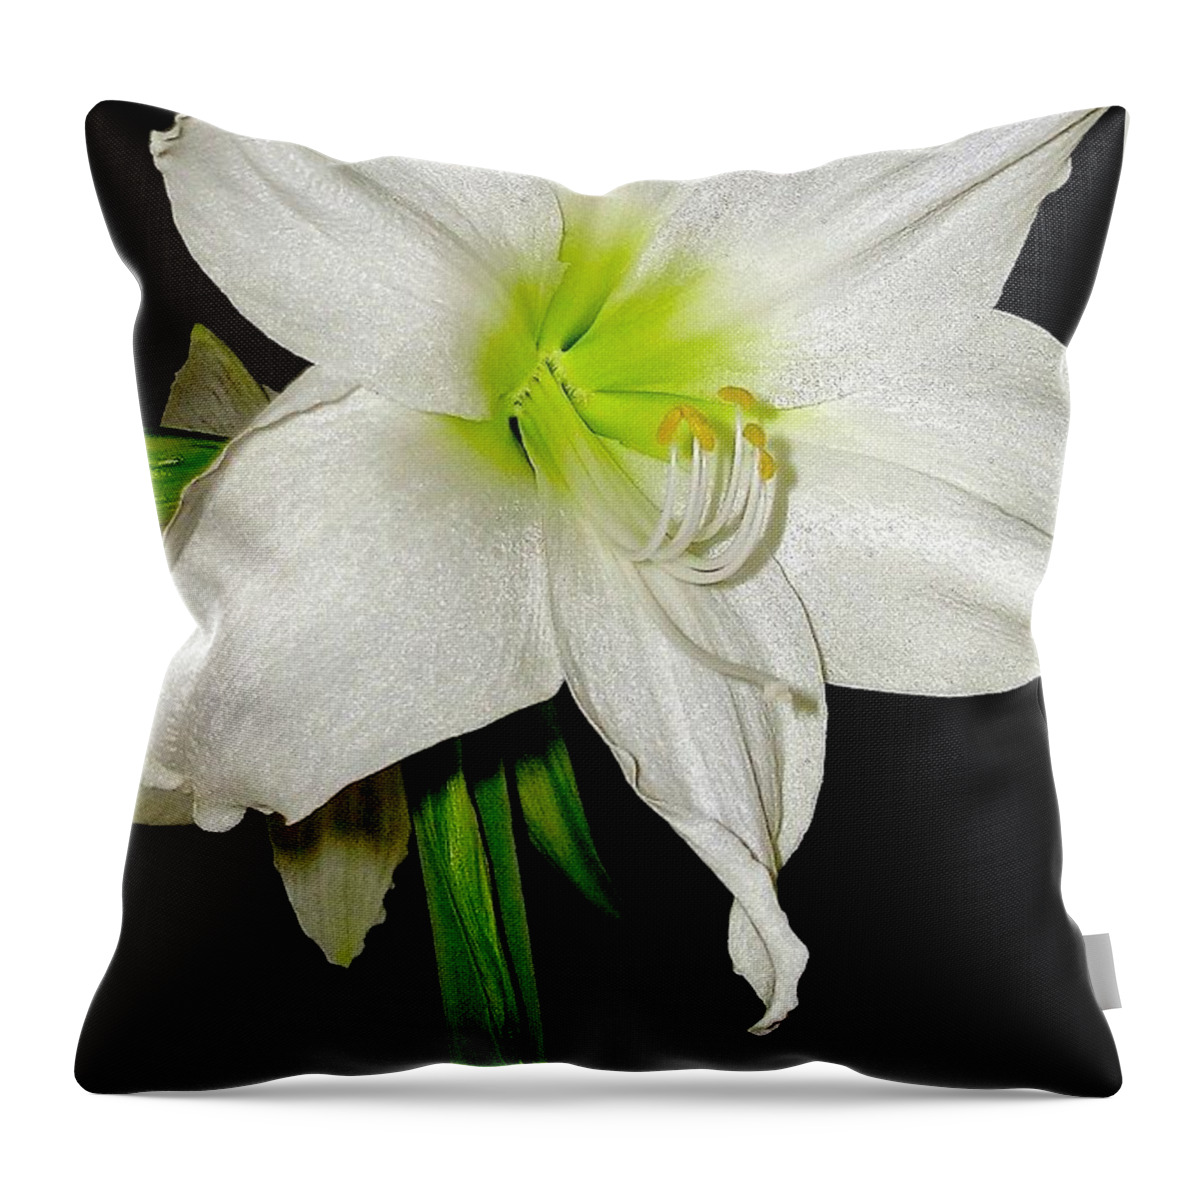 White Christmas Throw Pillow featuring the photograph White Christmas by James Temple